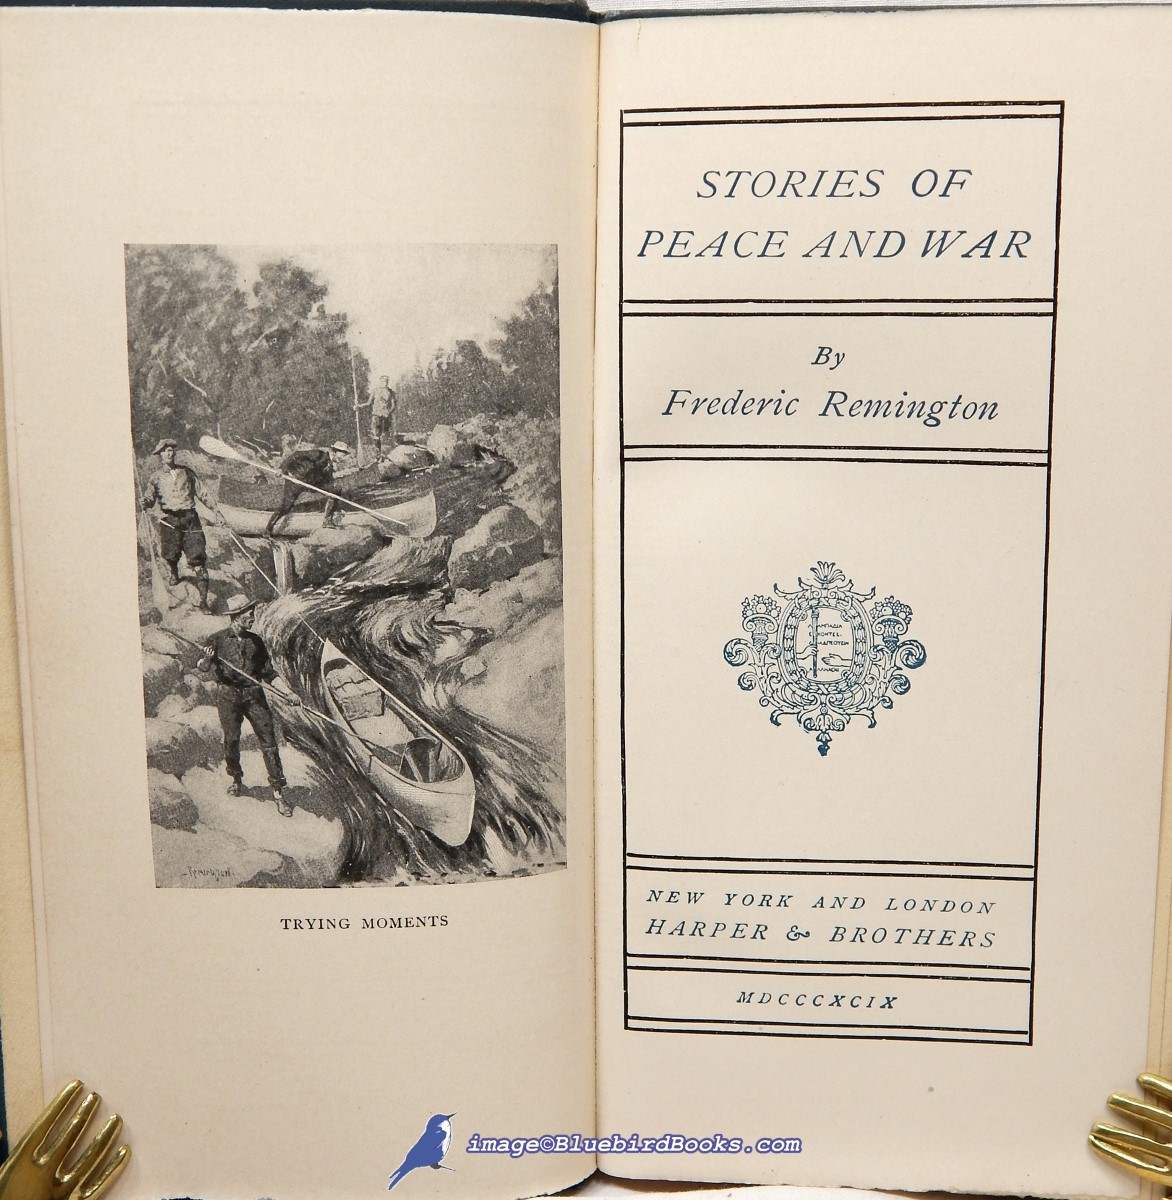 REMINGTON, FREDERIC - Stories of Peace and War (Little Books by Famous Writers Series)